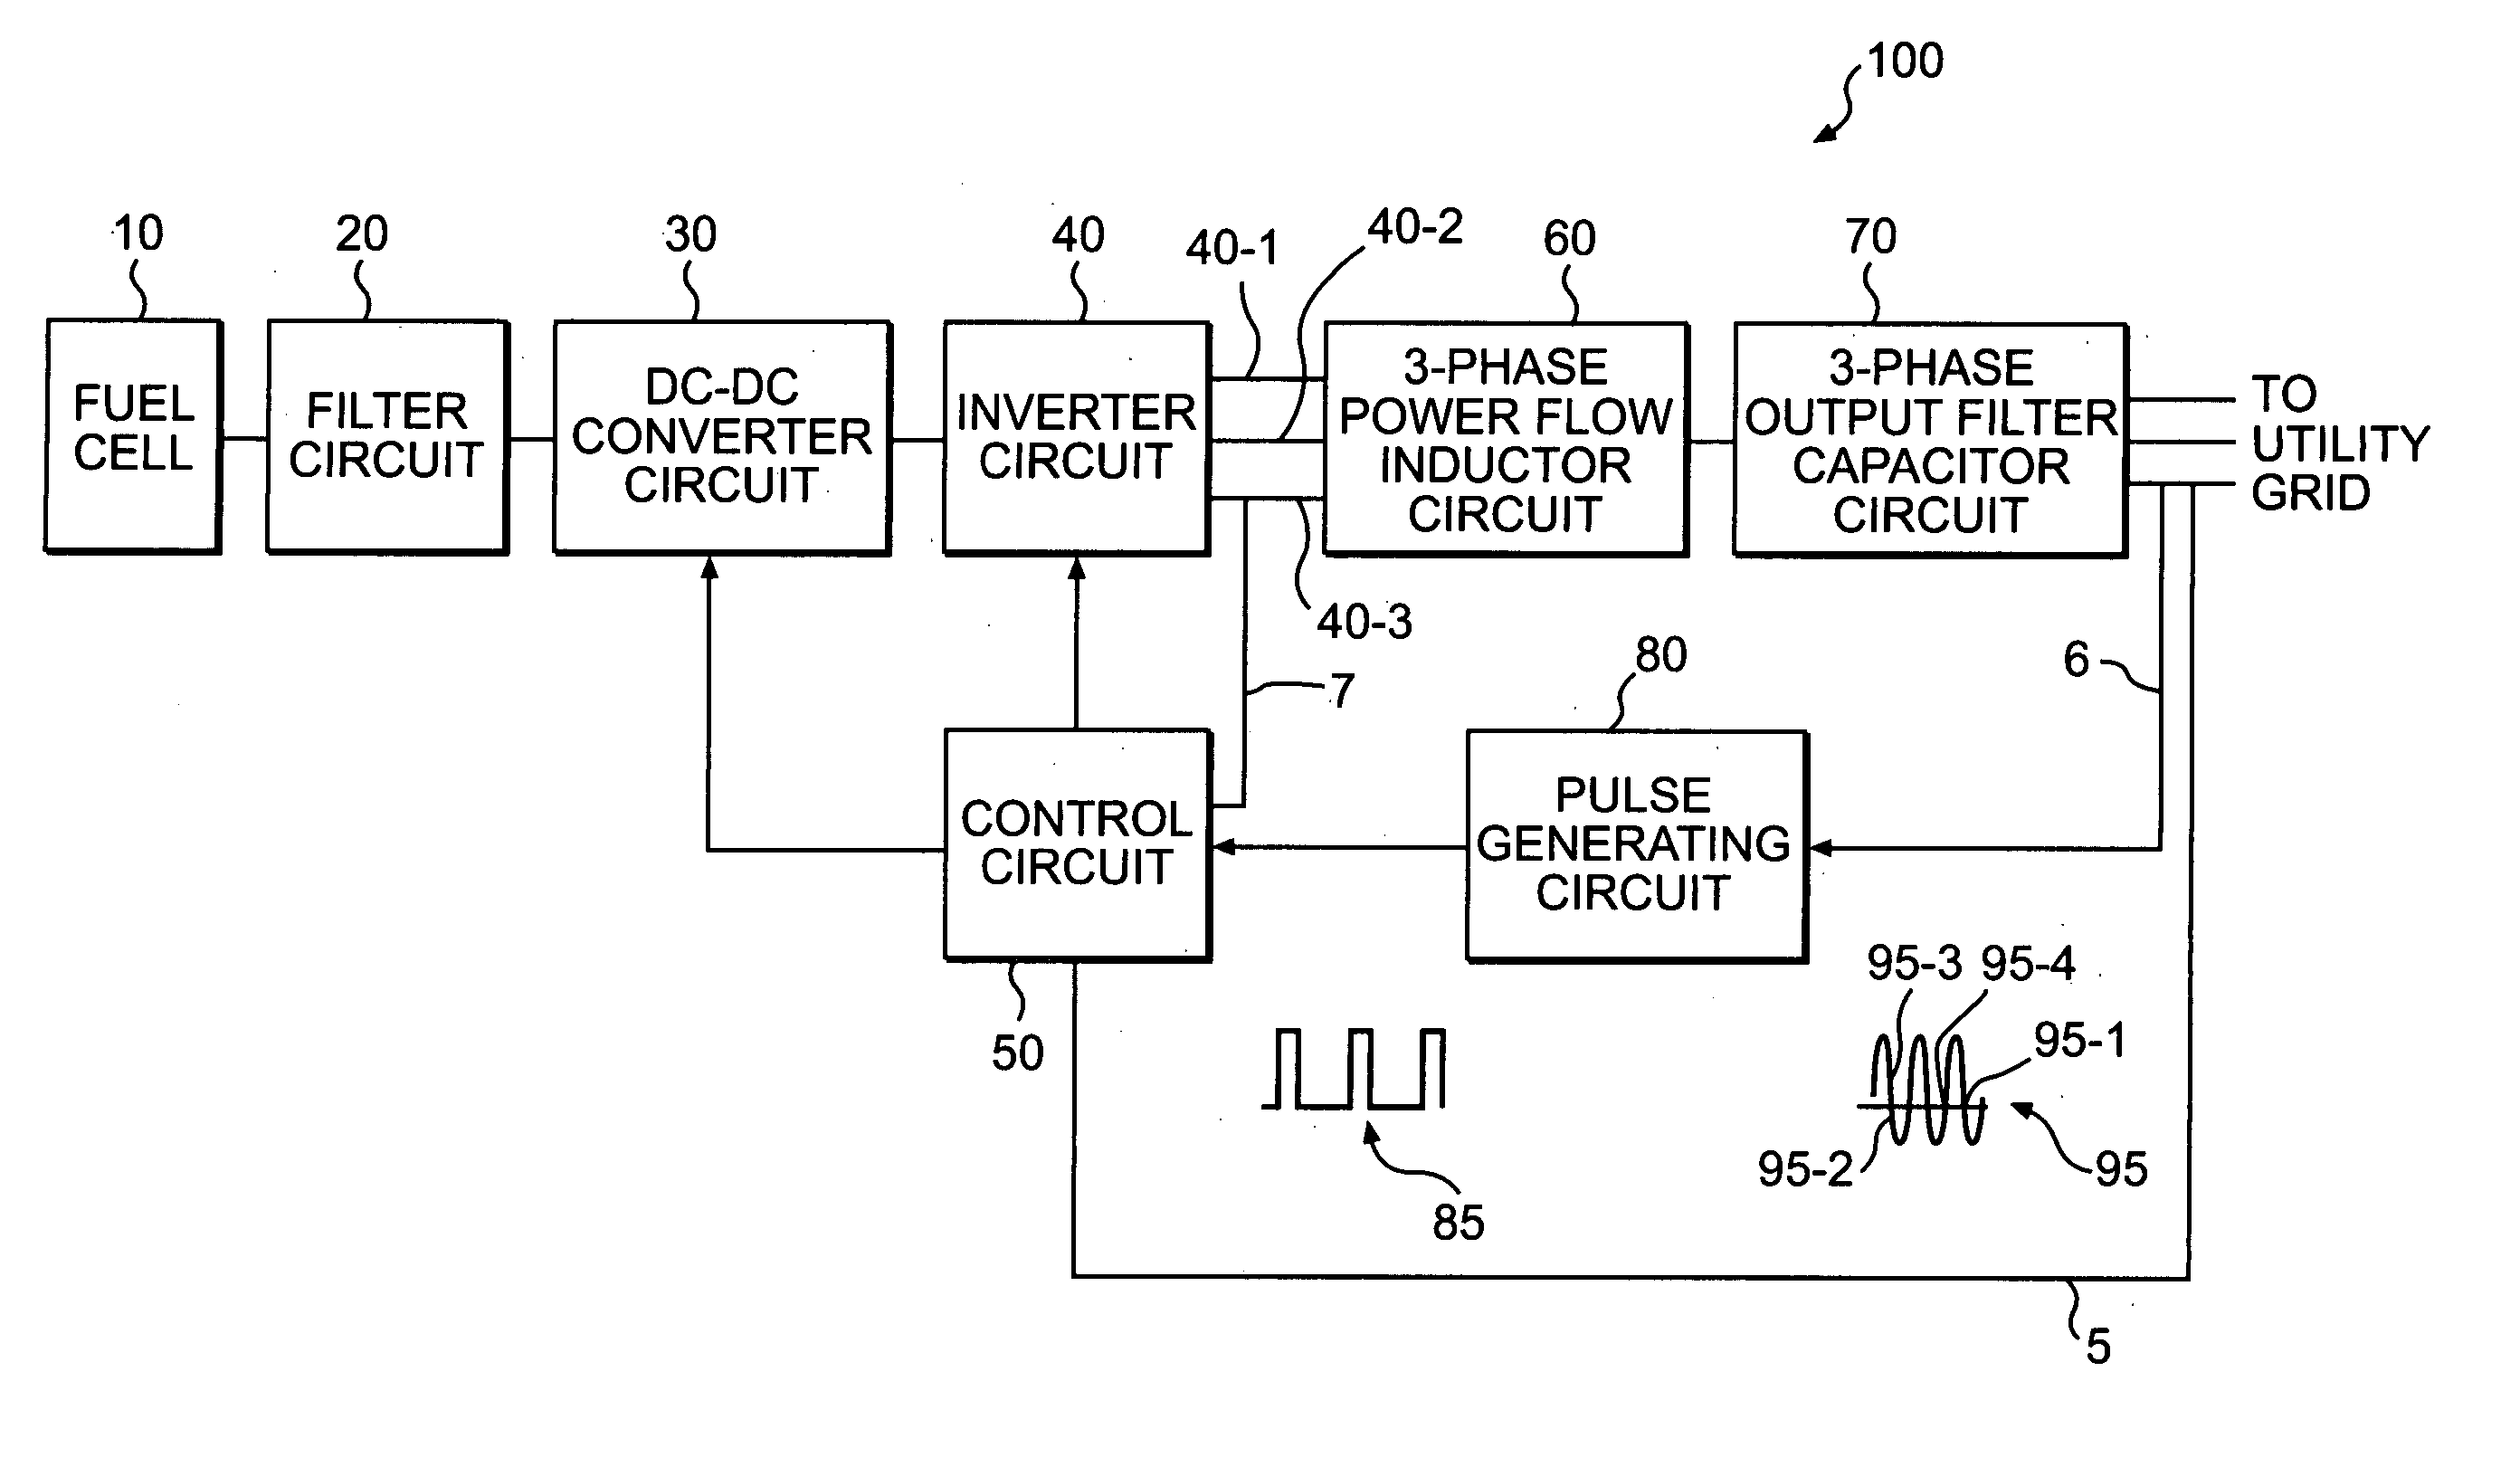 Power converter in a utility interactive system